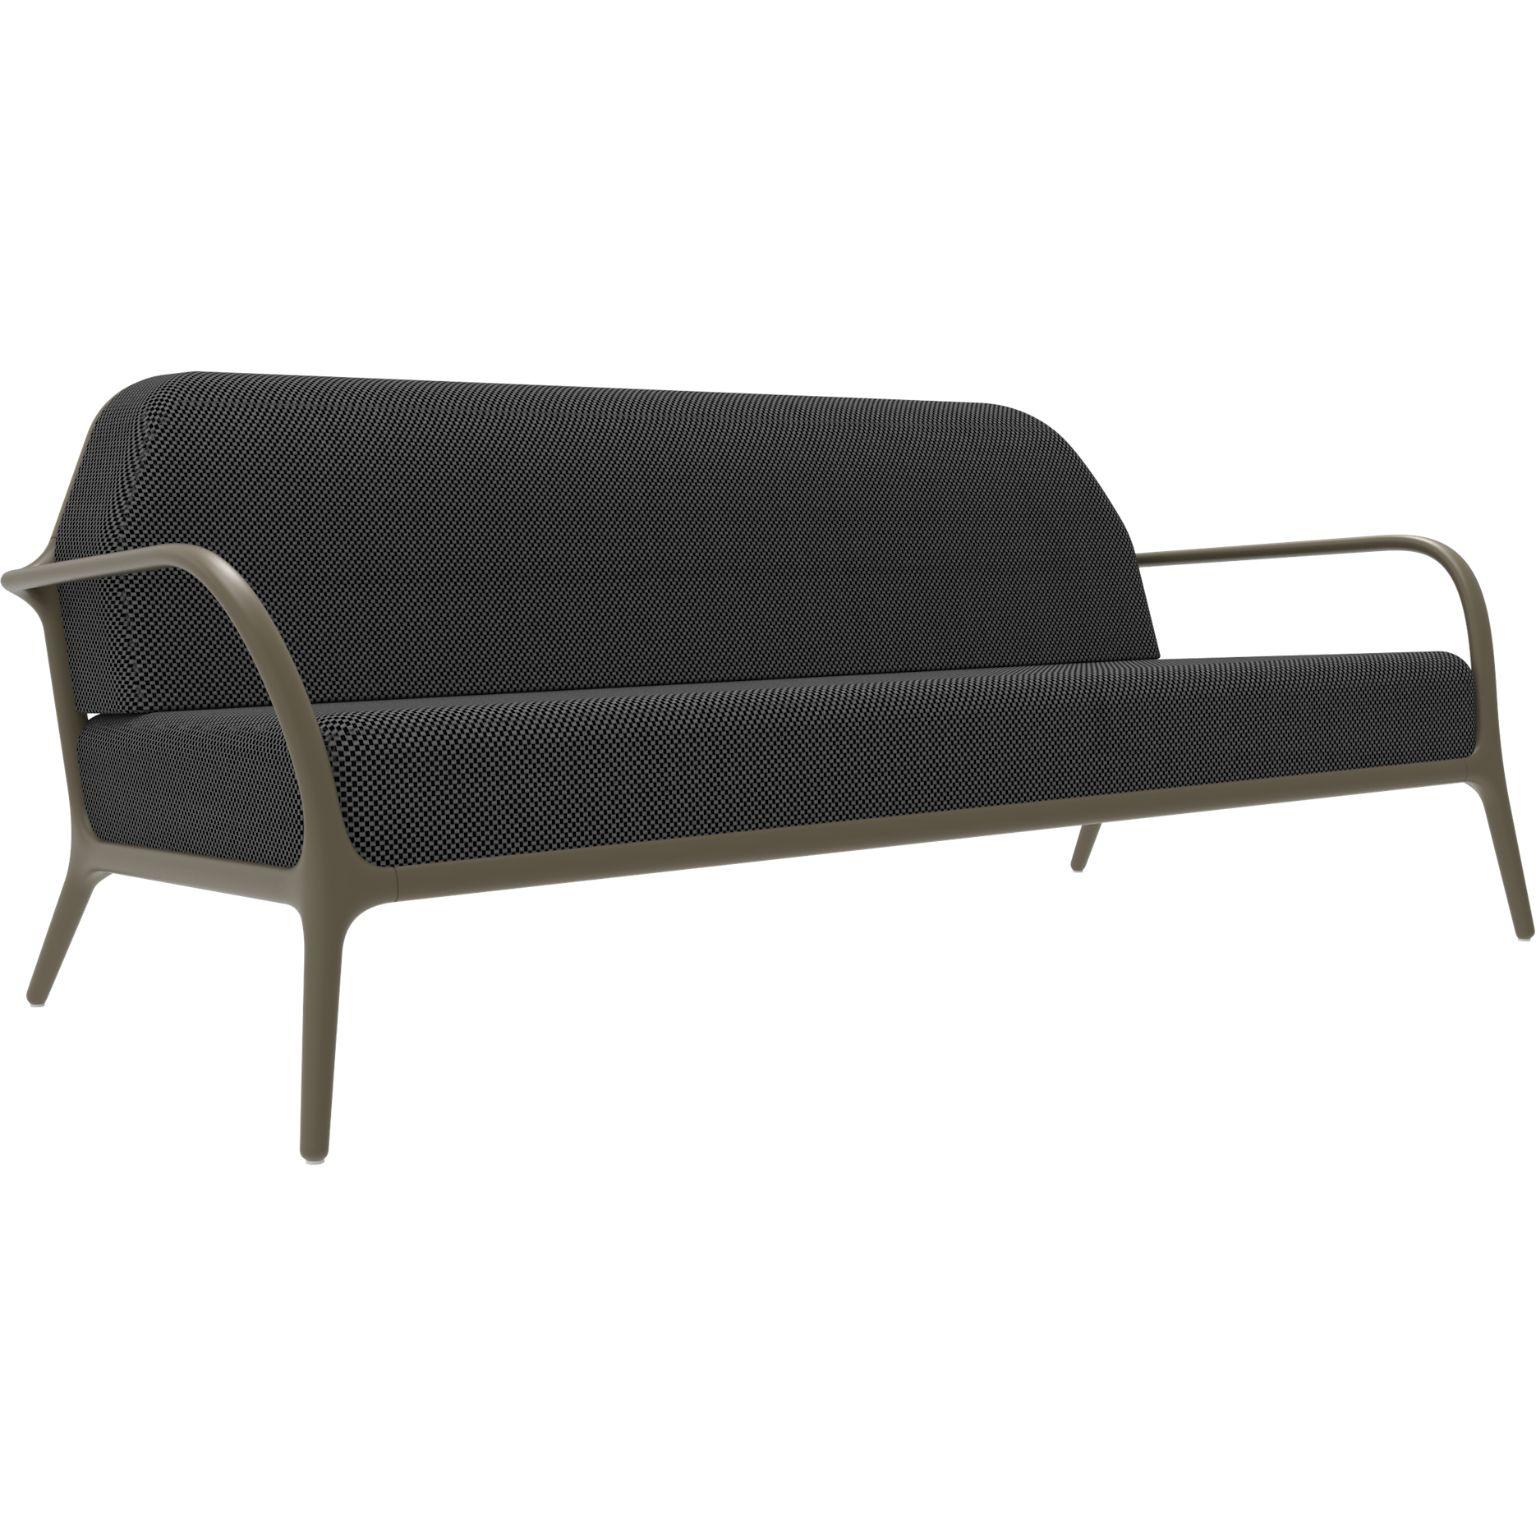 Xaloc bronze sofá by MOWEE
Dimensions: D100 x W200 x H81 cm (Seat Height 42 cm)
Material: Aluminium, Textile
Weight: 46 kg
Also Available in different colors and finishes. 

 Xaloc synthesizes the lines of interior furniture to extrapolate to